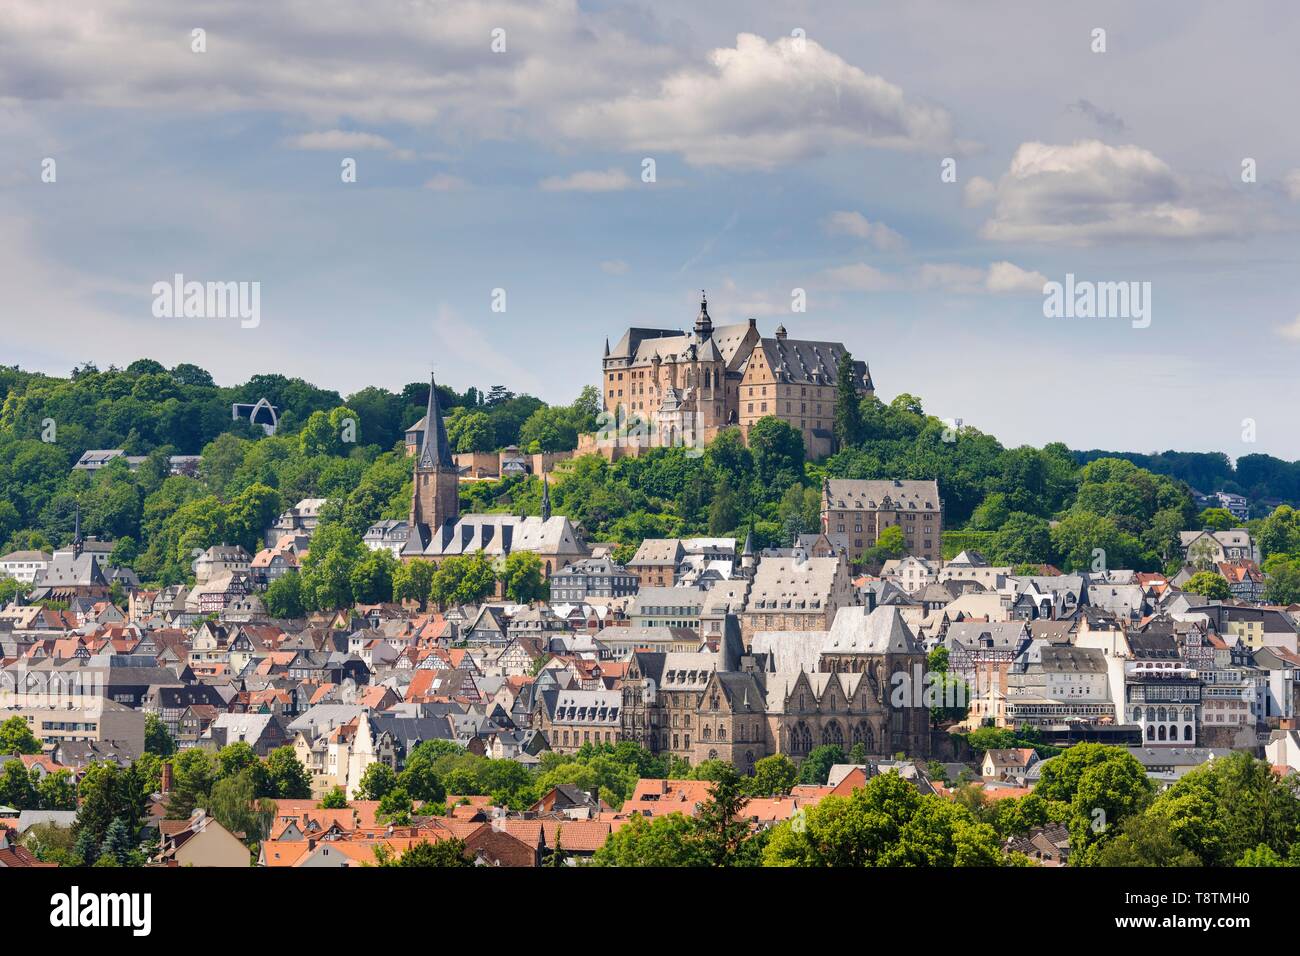 City view, landgrave castle with university museum and parish church St Marien, old town, Marburg, Hesse, Germany Stock Photo